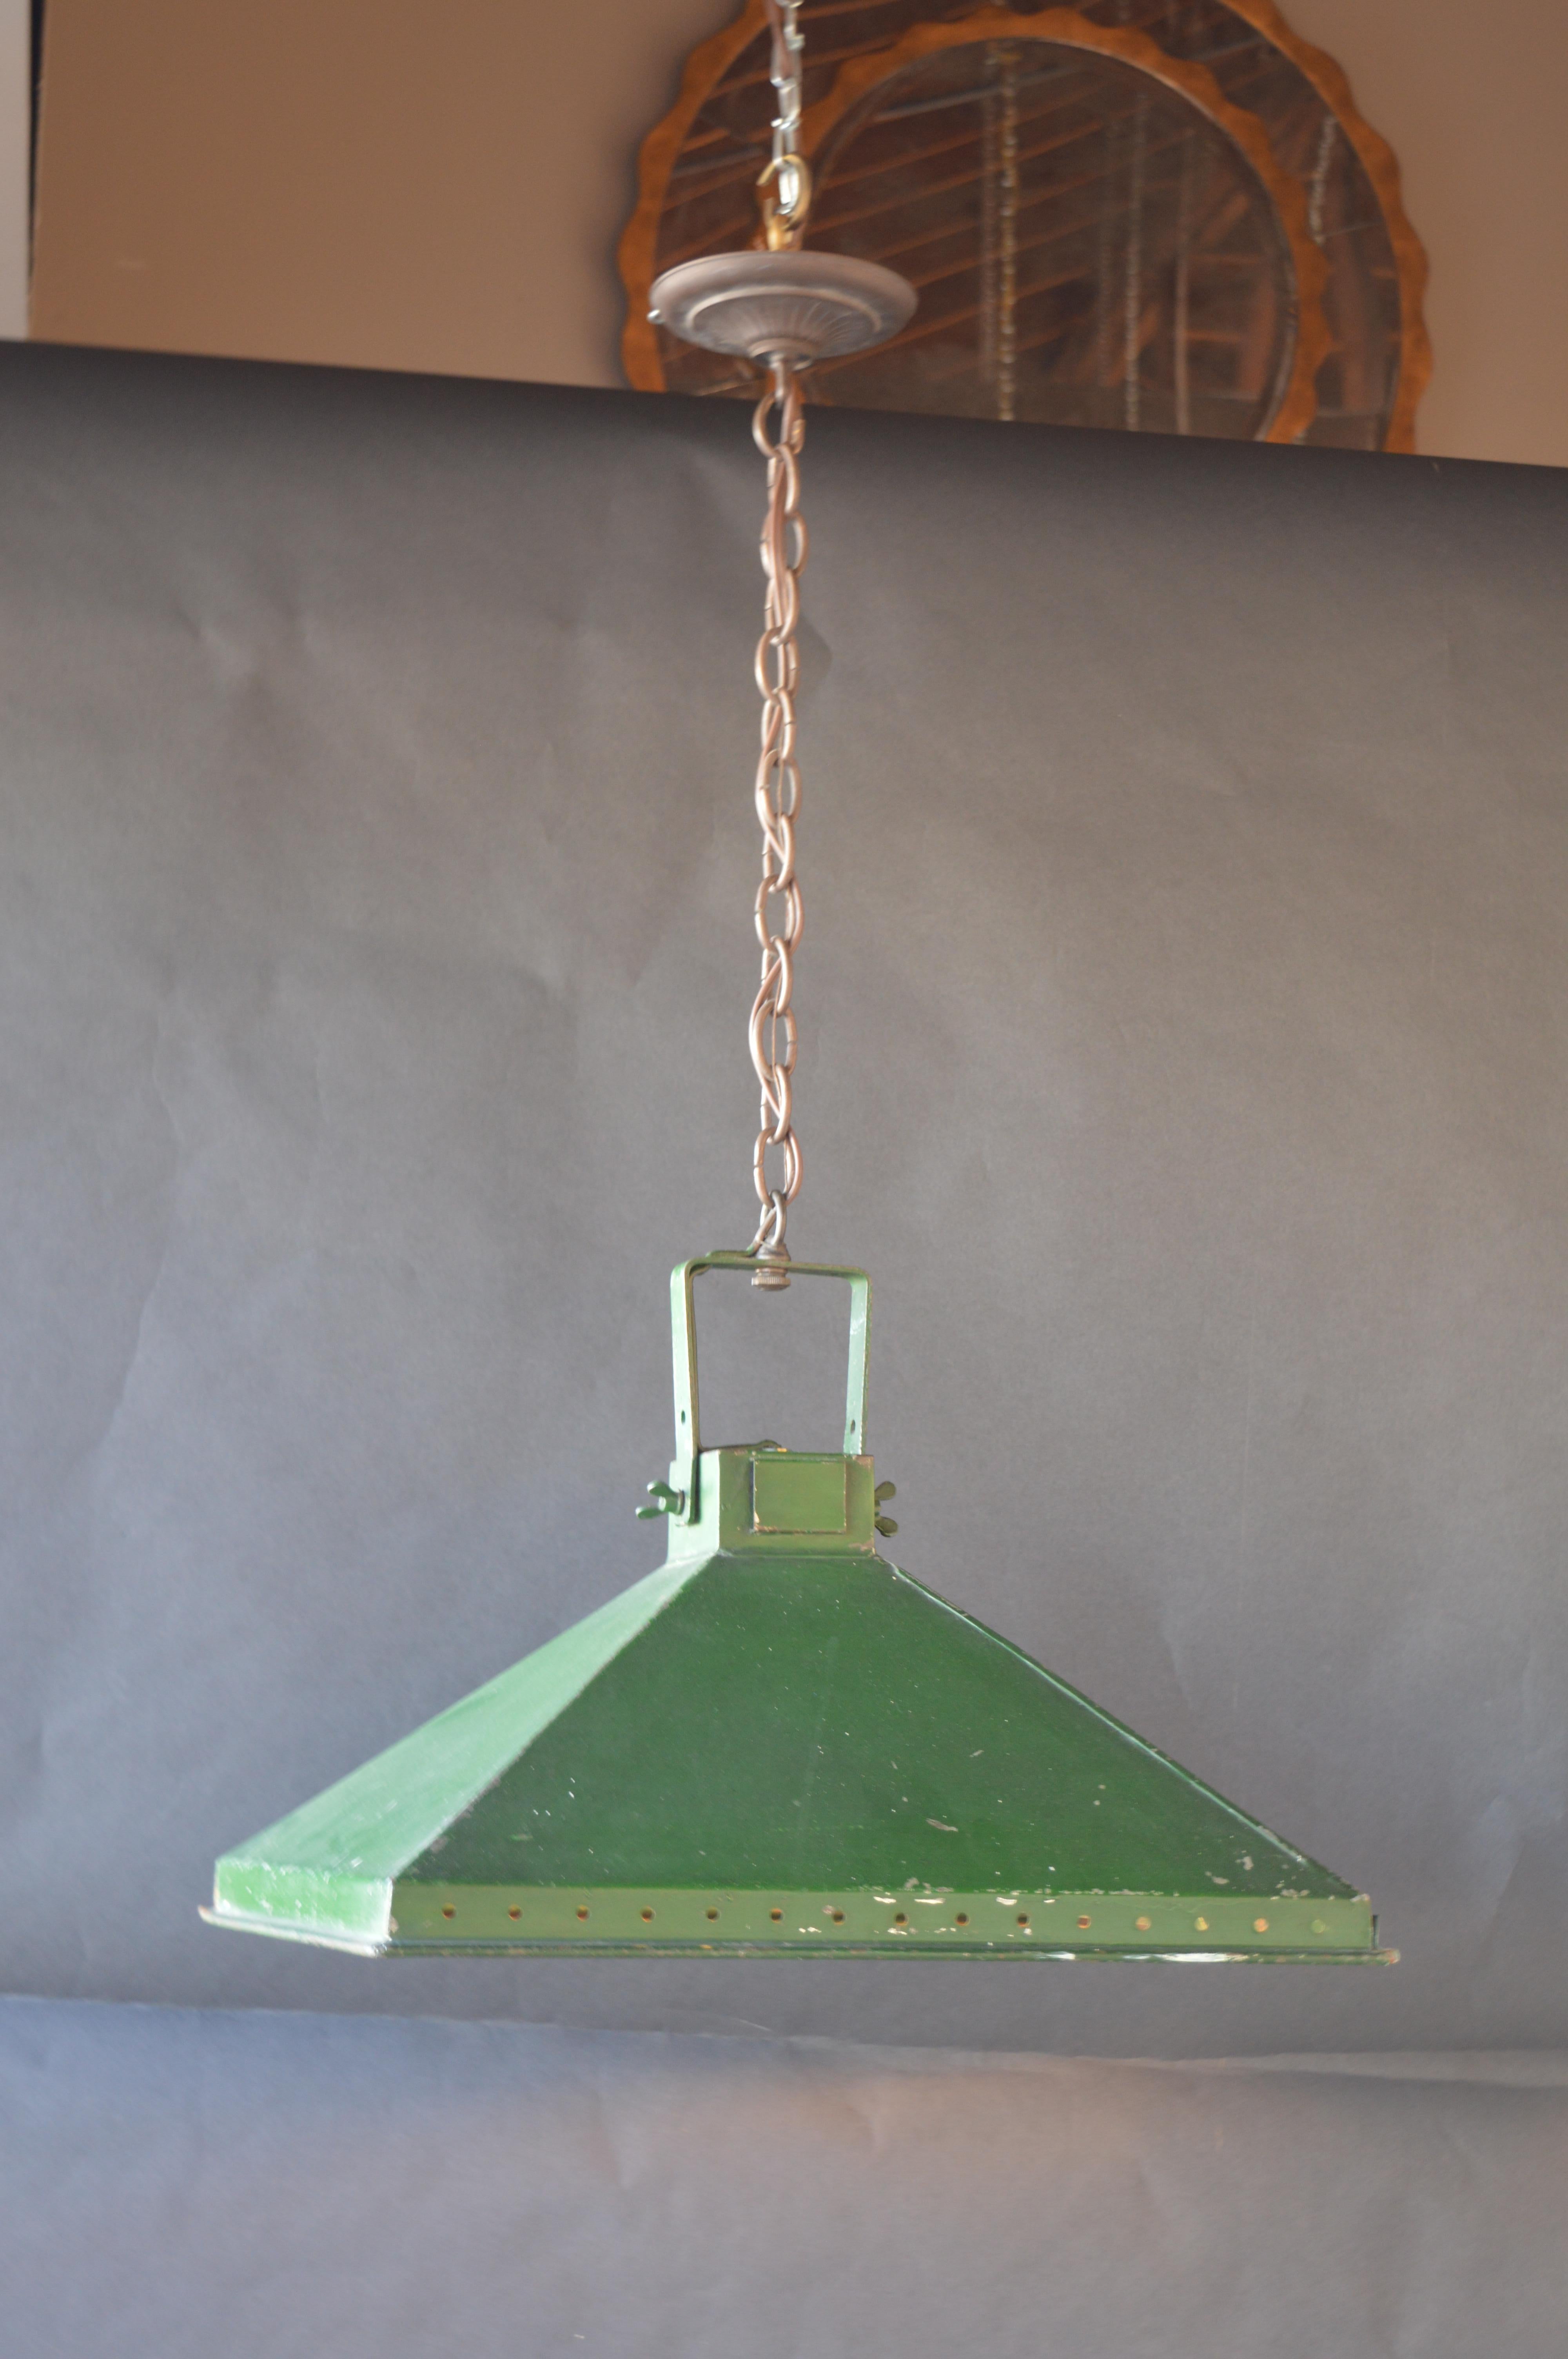 Pair of industrial lanterns painted green. Mirrored inside around the lightbulb.